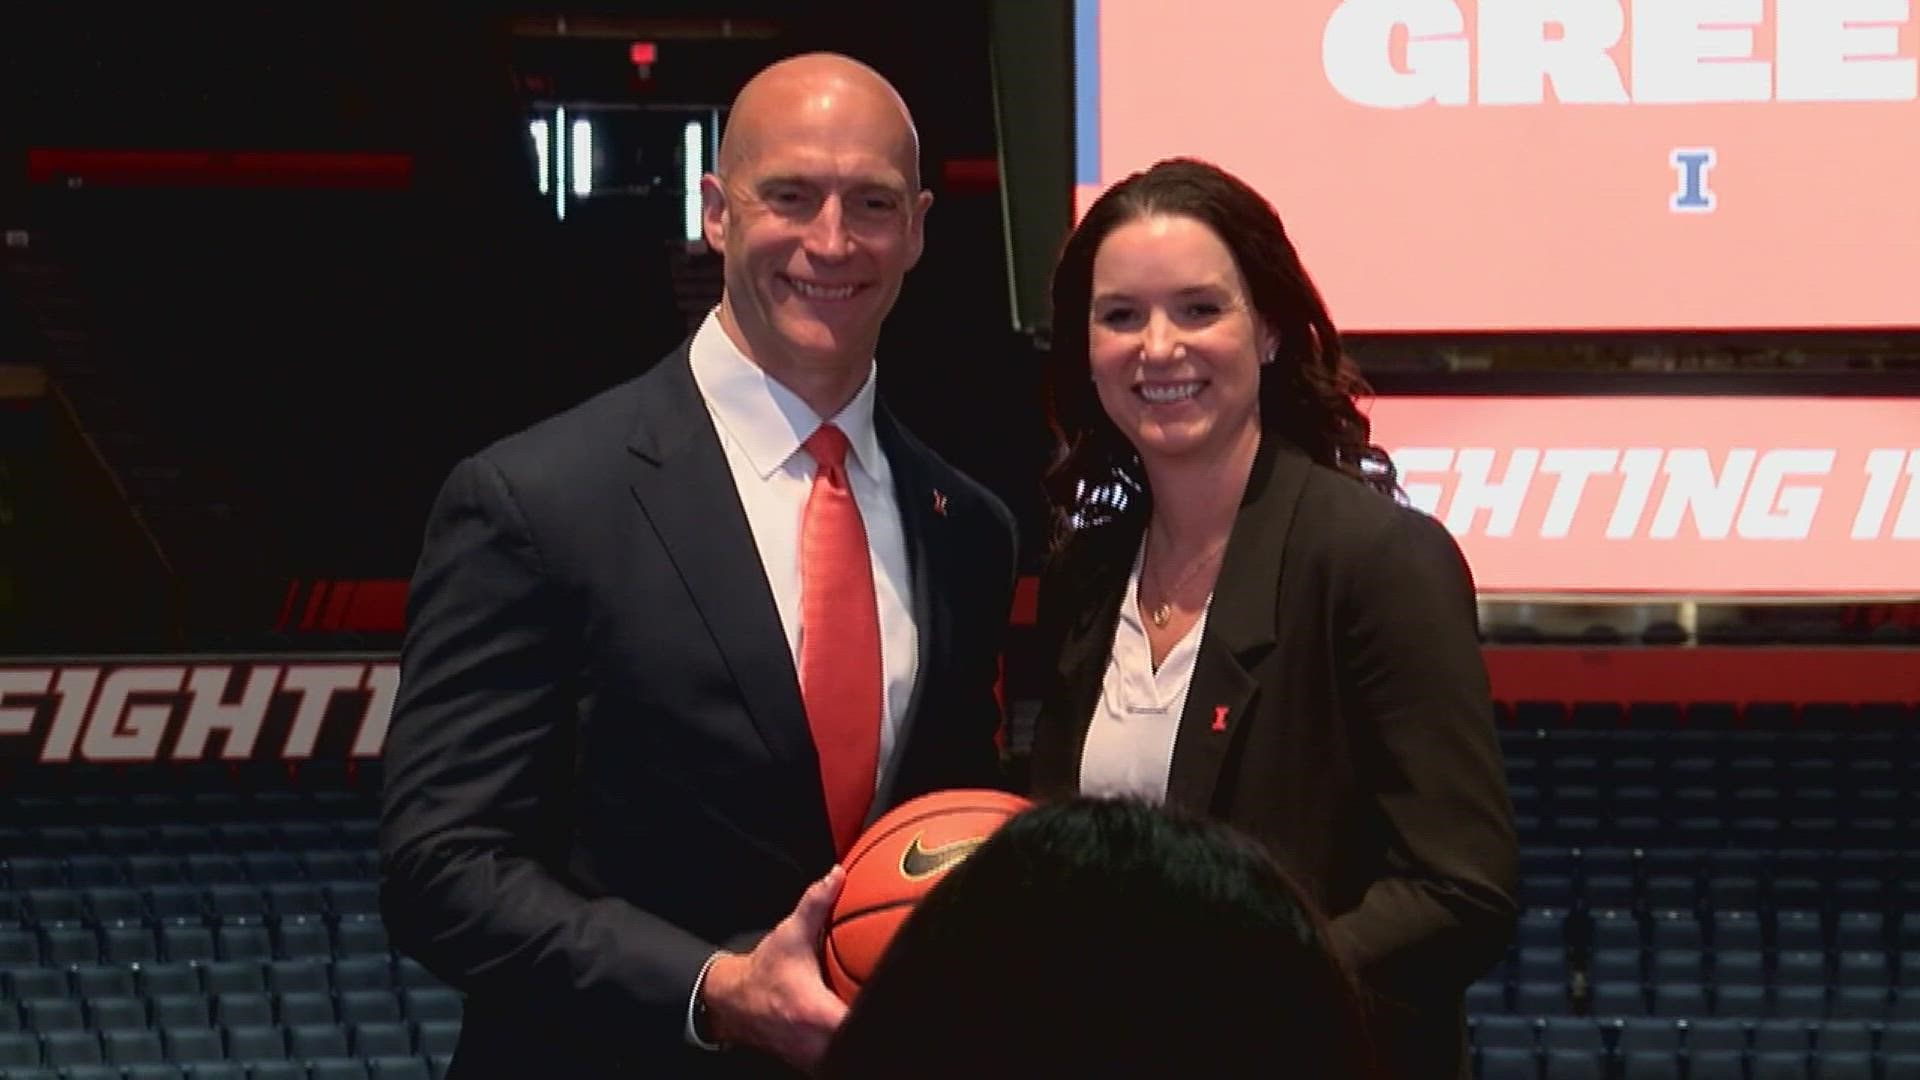 The Illini officially introduced Shauna Green as the 10th coach in program history.